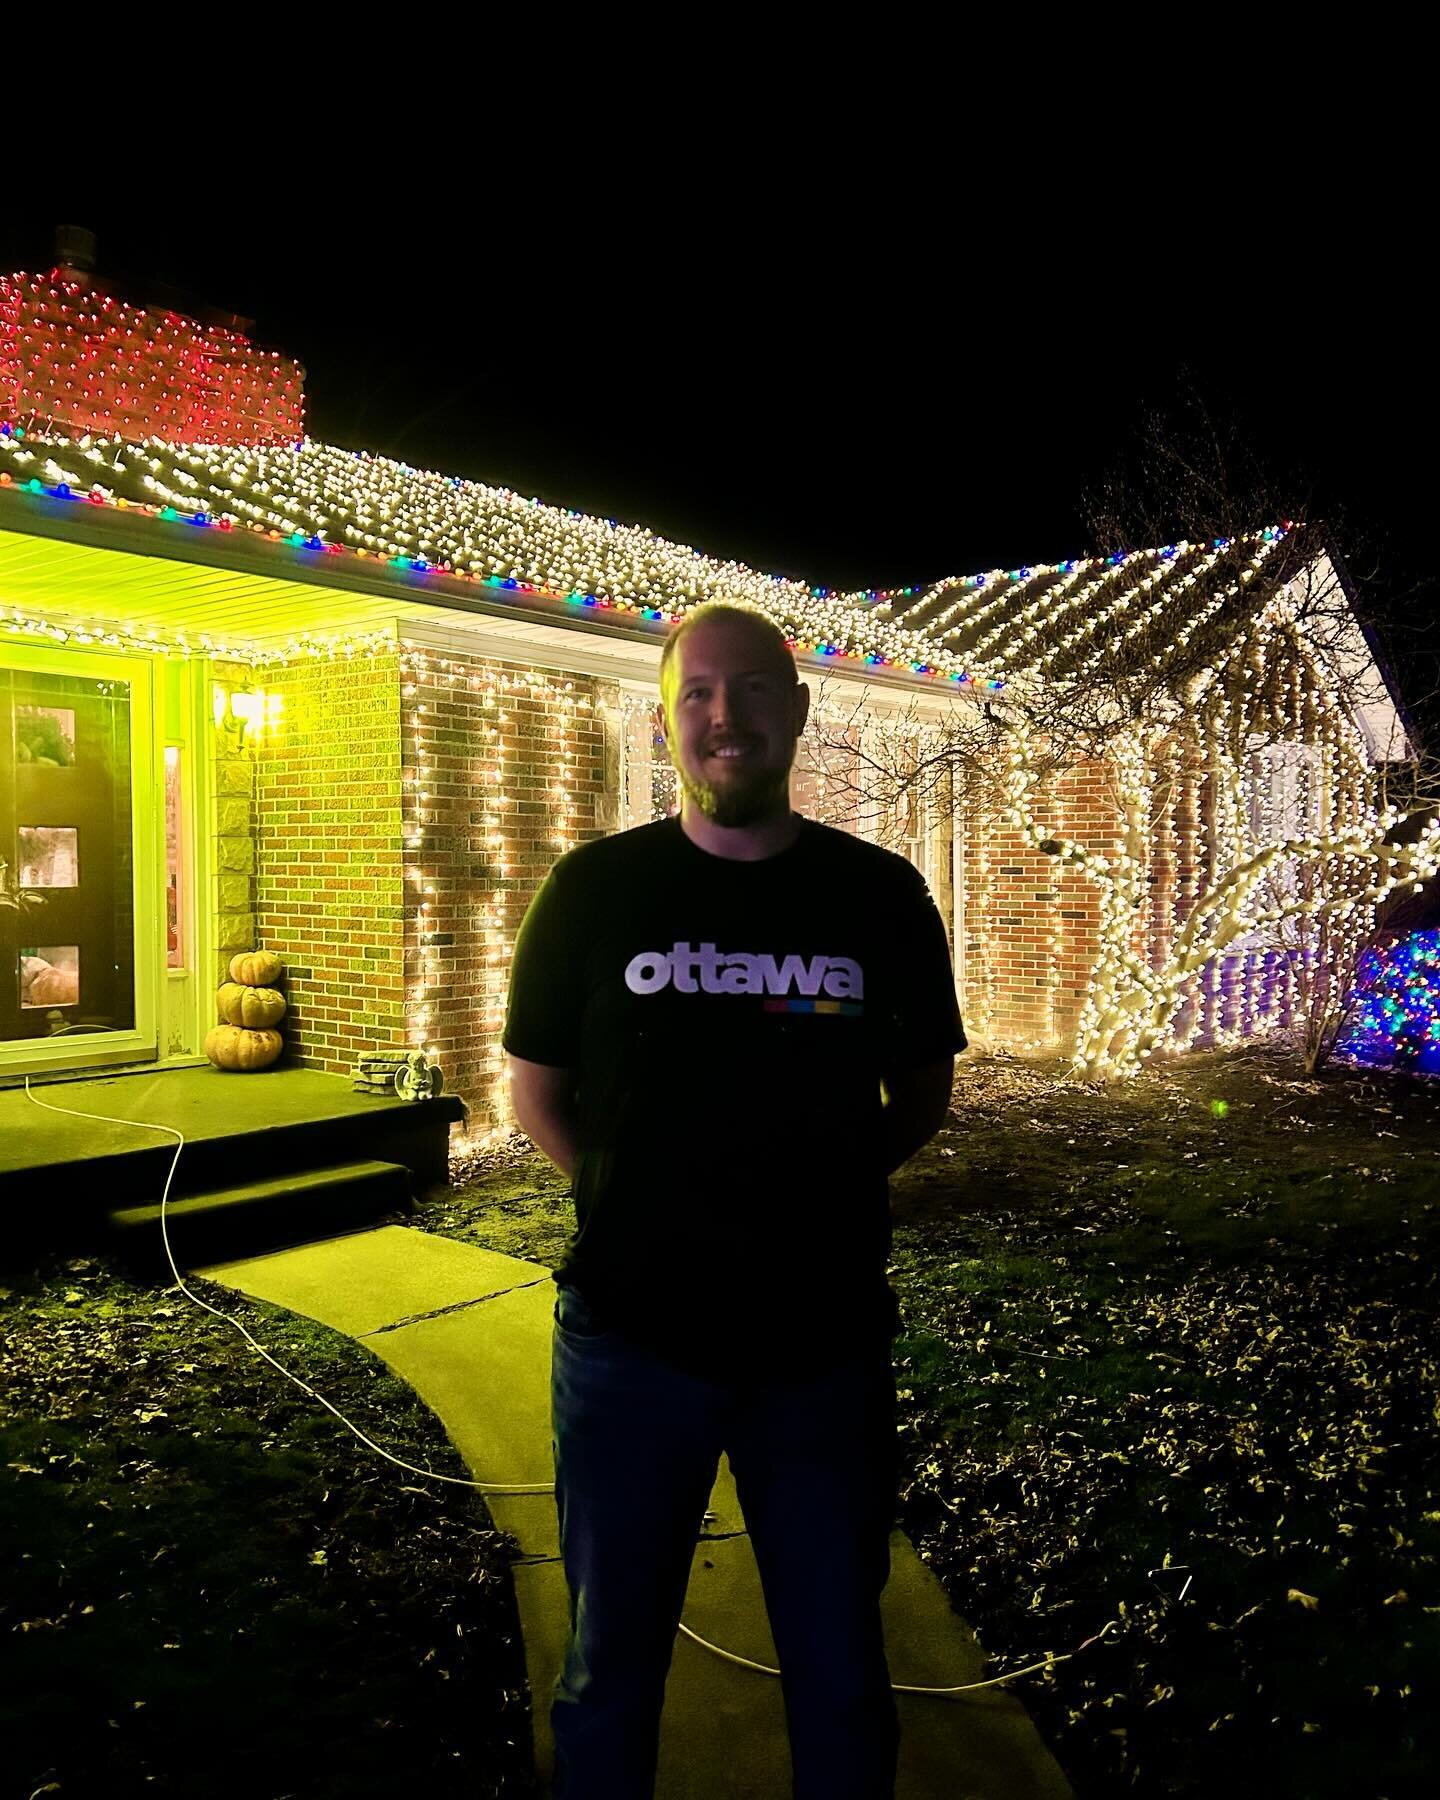 We were able to provide the Ottawa Light Up Contest winner, the Dolby family, with some Ottawa t-shirts last night! Again, we are so grateful for the astounding response on this first go around from both the participants and community members enjoyin